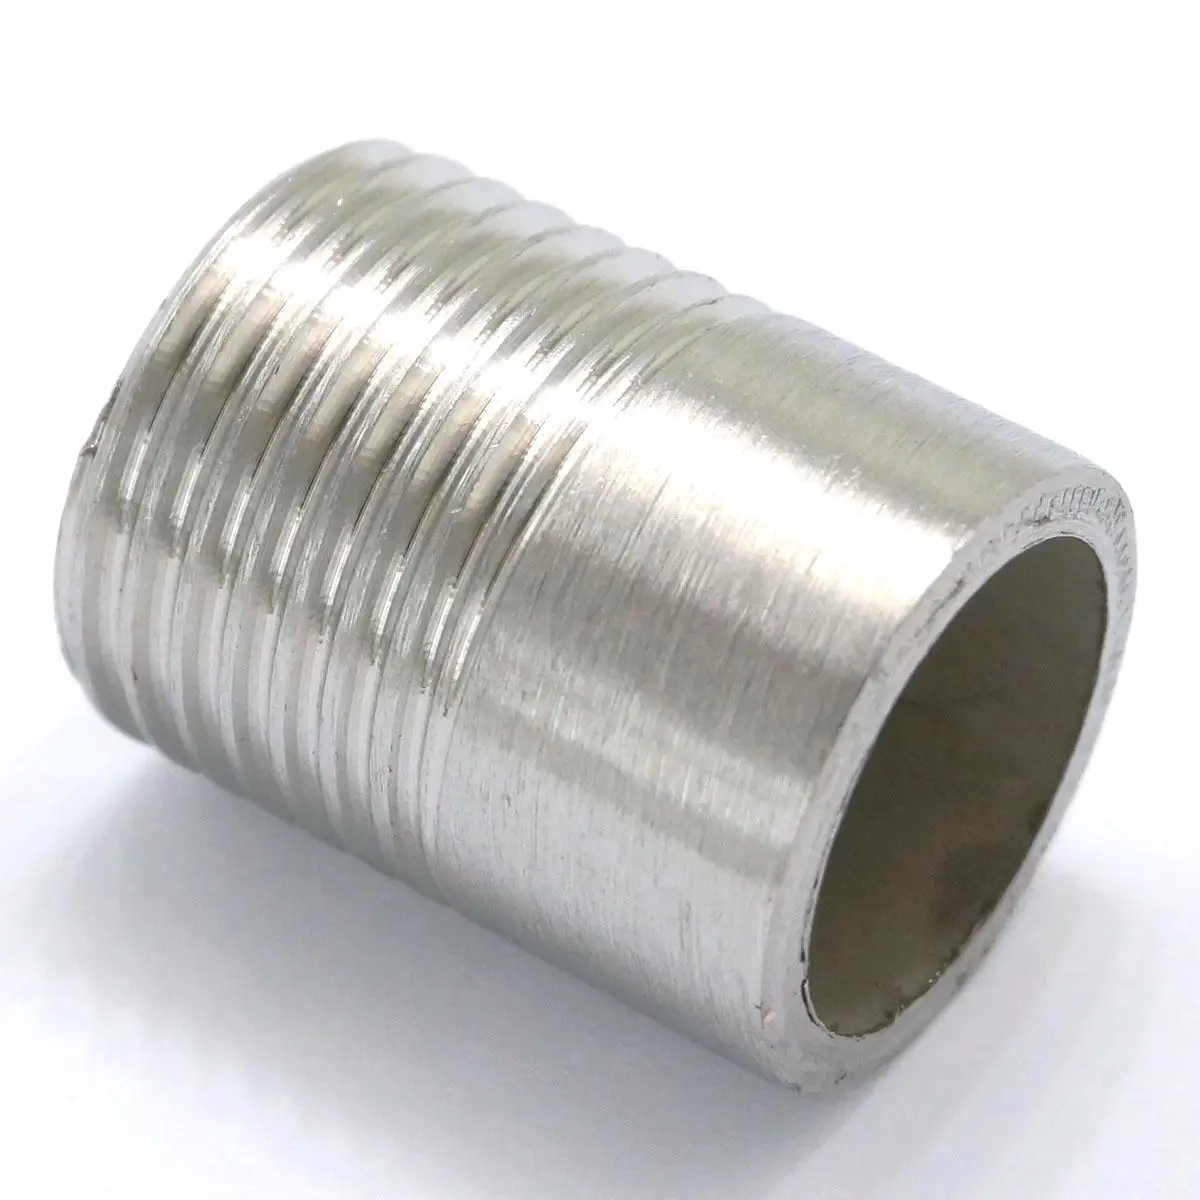 STAINLESS STEEL 1/2" BSP MALE EQUAL NIPPLE SS PIPE FITTING COUPLING CONNECTOR 